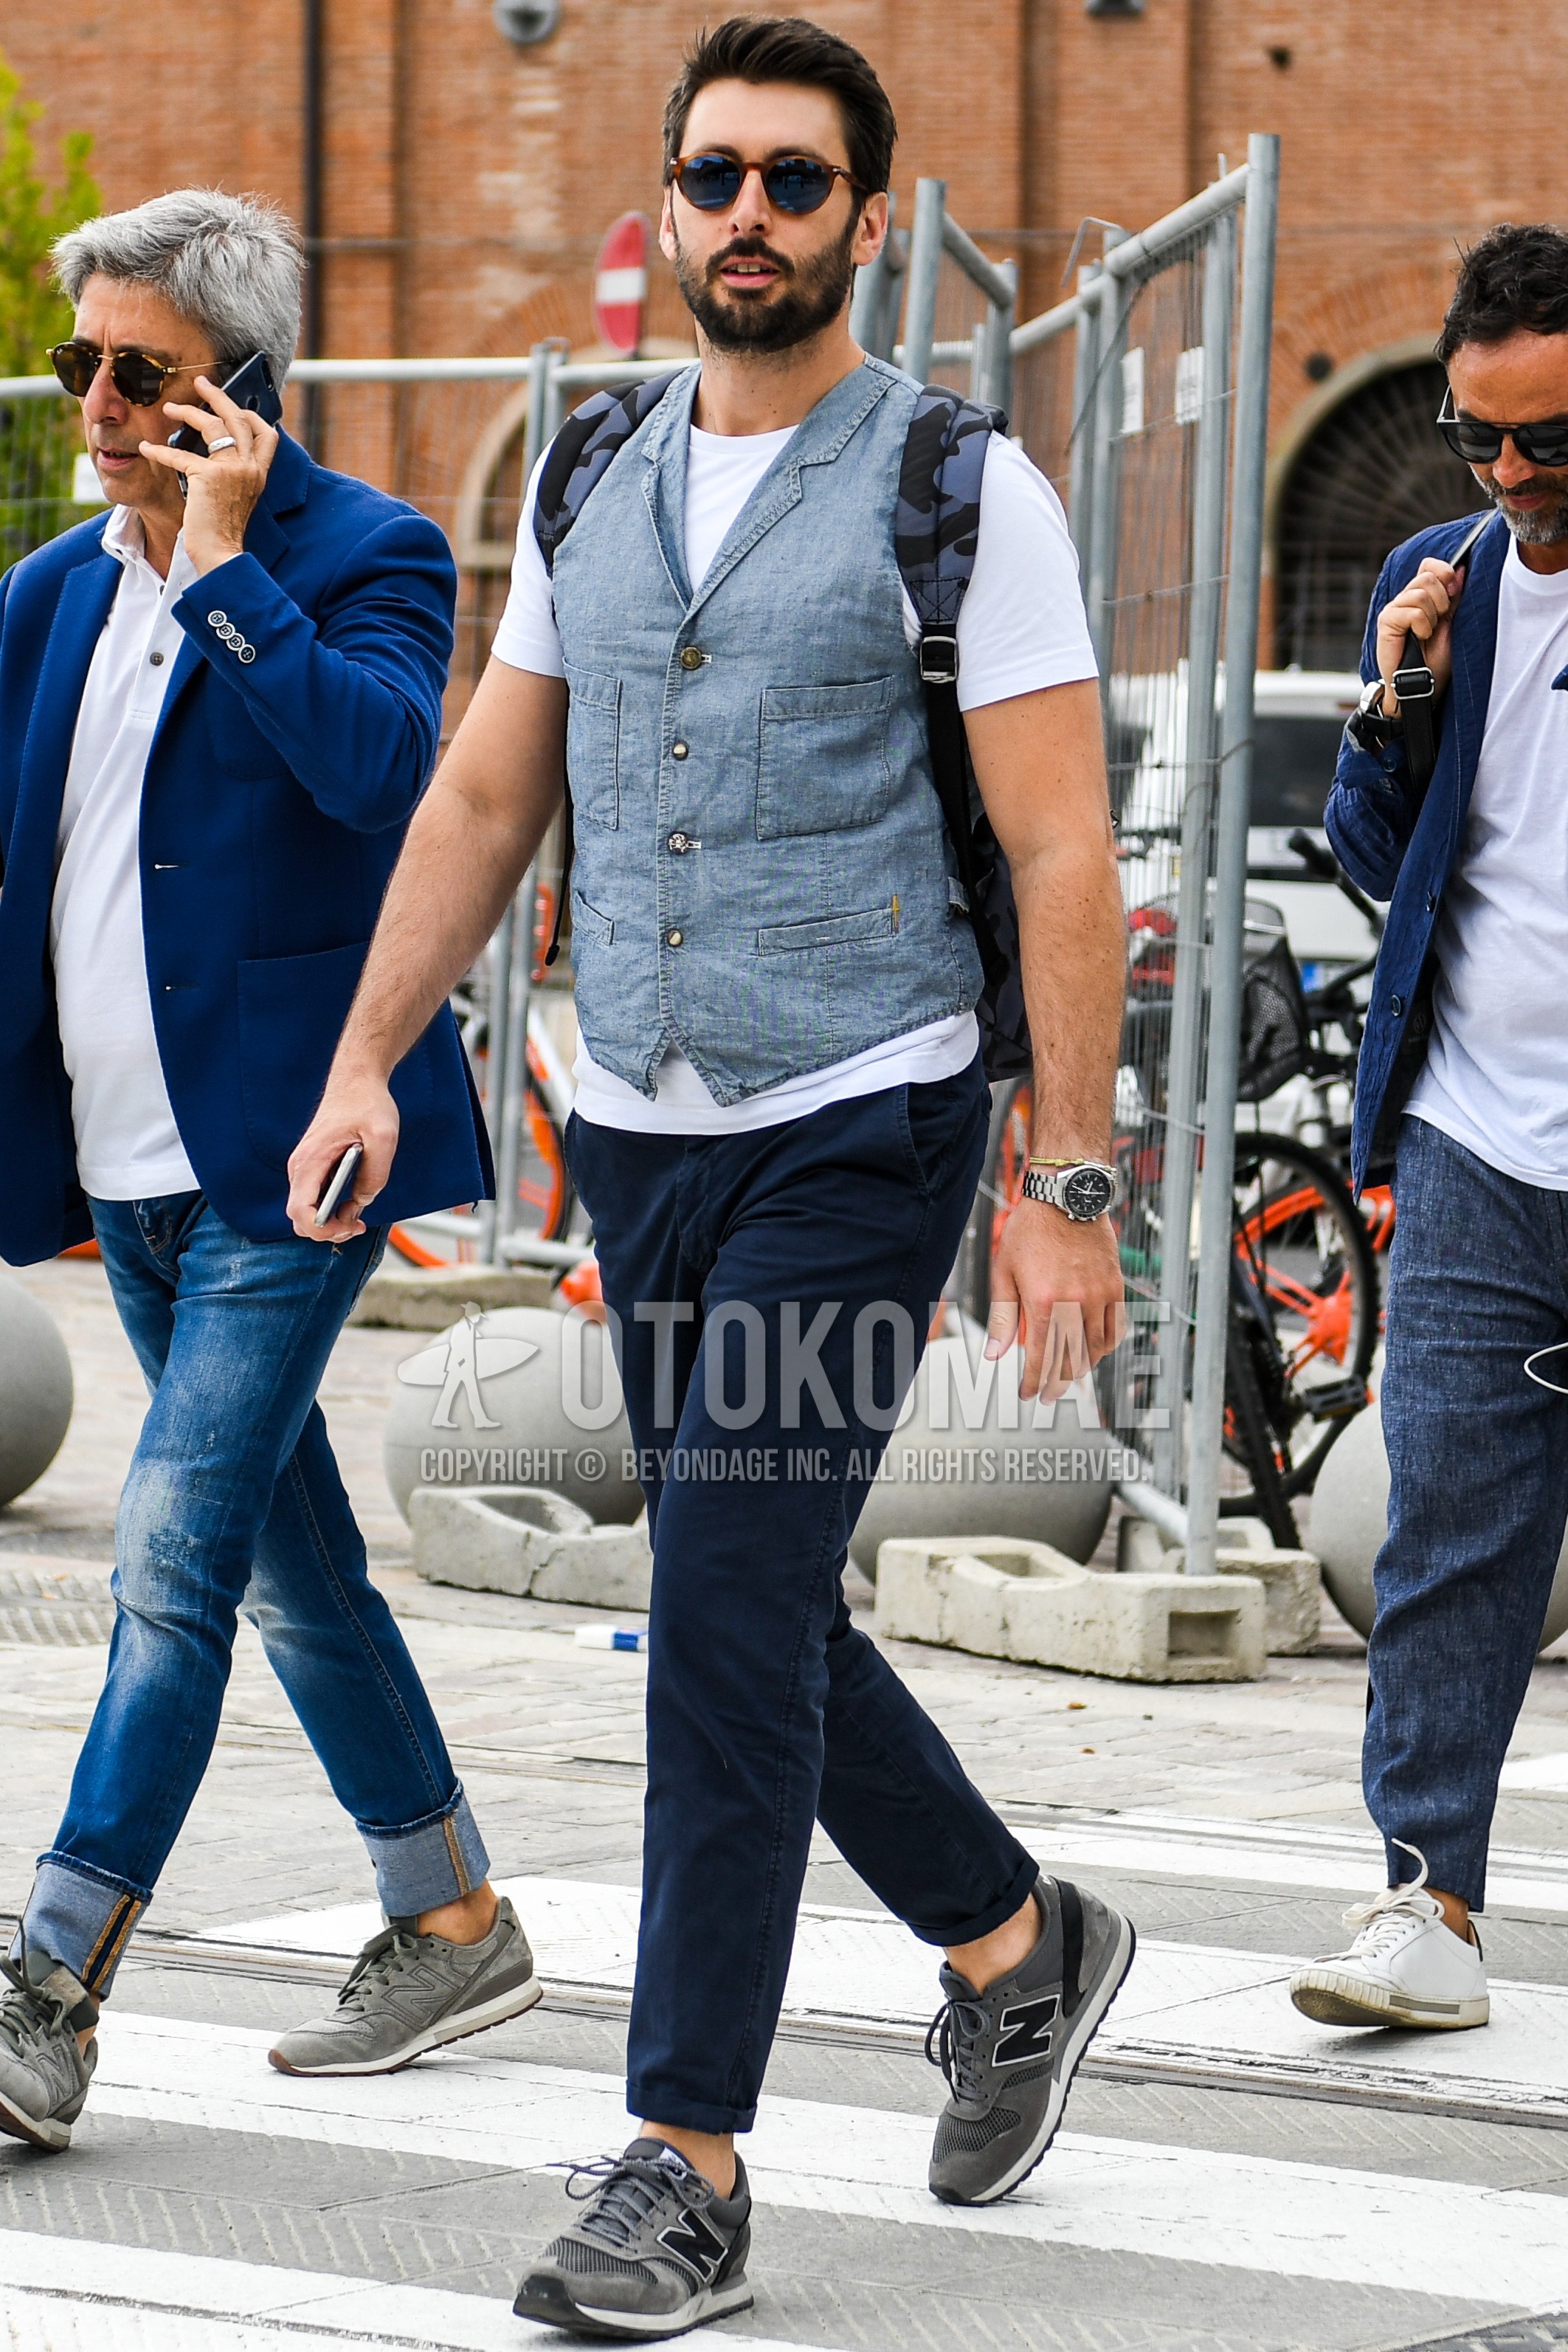 Men's spring summer autumn outfit with gray plain gilet, white plain t-shirt, navy plain chinos, dark gray low-cut sneakers.